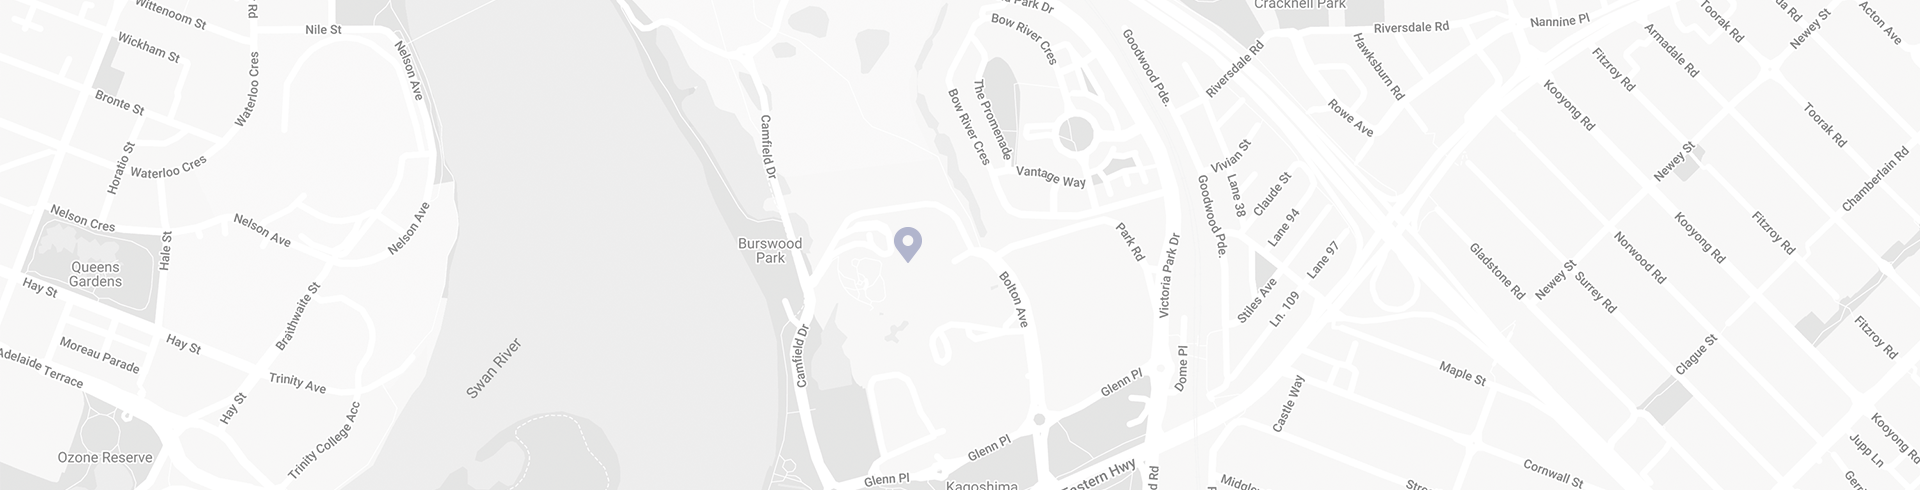 Location pointer of Crown Hotel Perth on a map 